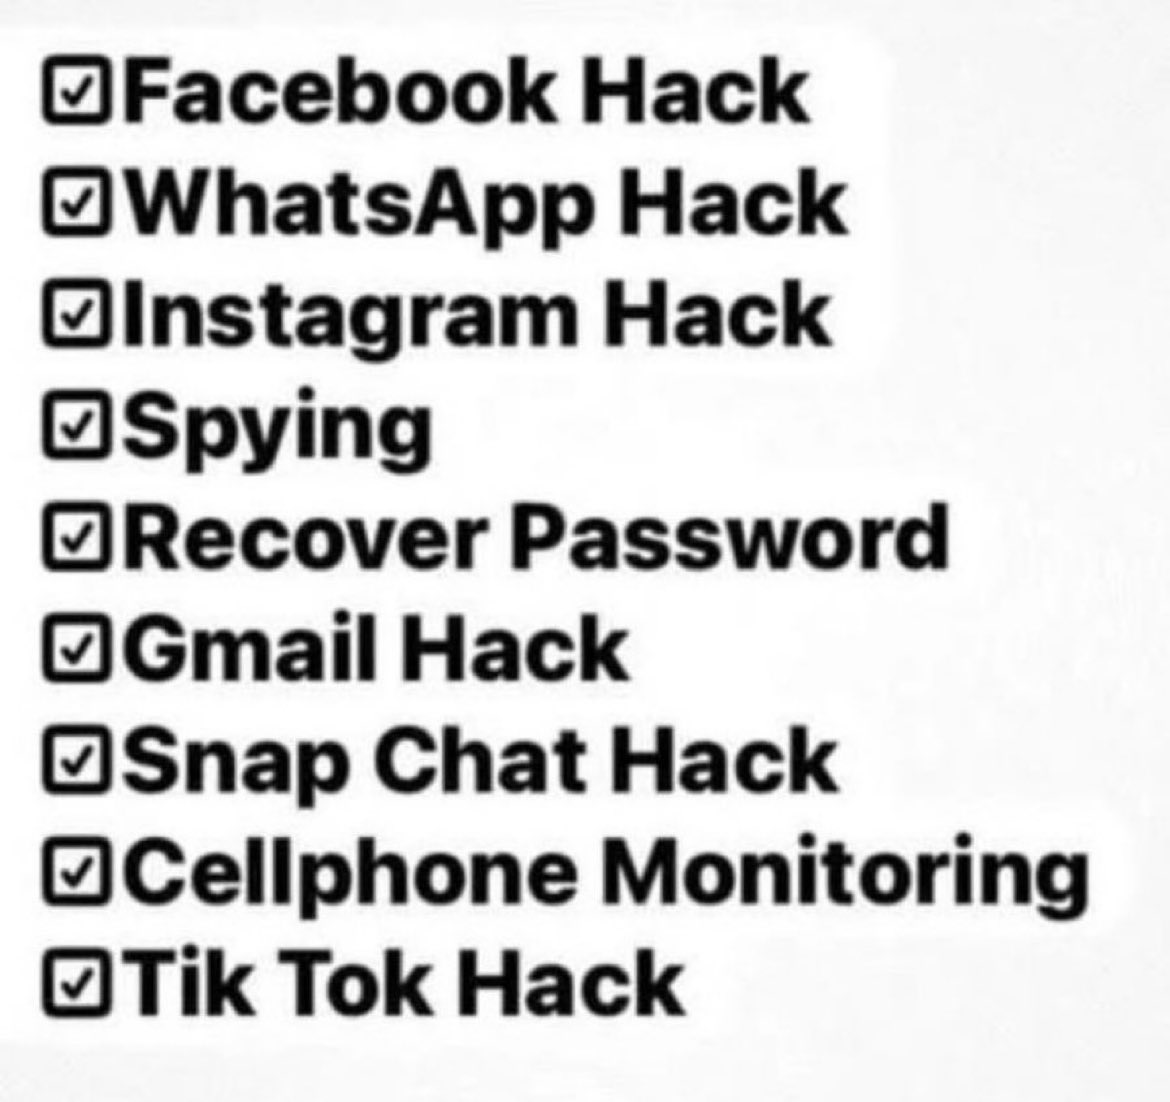 Submit your hacking questions and get real fast solutions
 I am available 24 hours a day, 7 days a week
 #hacking #twitterdown #facebookdown #meta #icloud
 The sooner the better!  !
 Email me now to hack a secure Snapchat account #snap #snapchat #snapchatleak